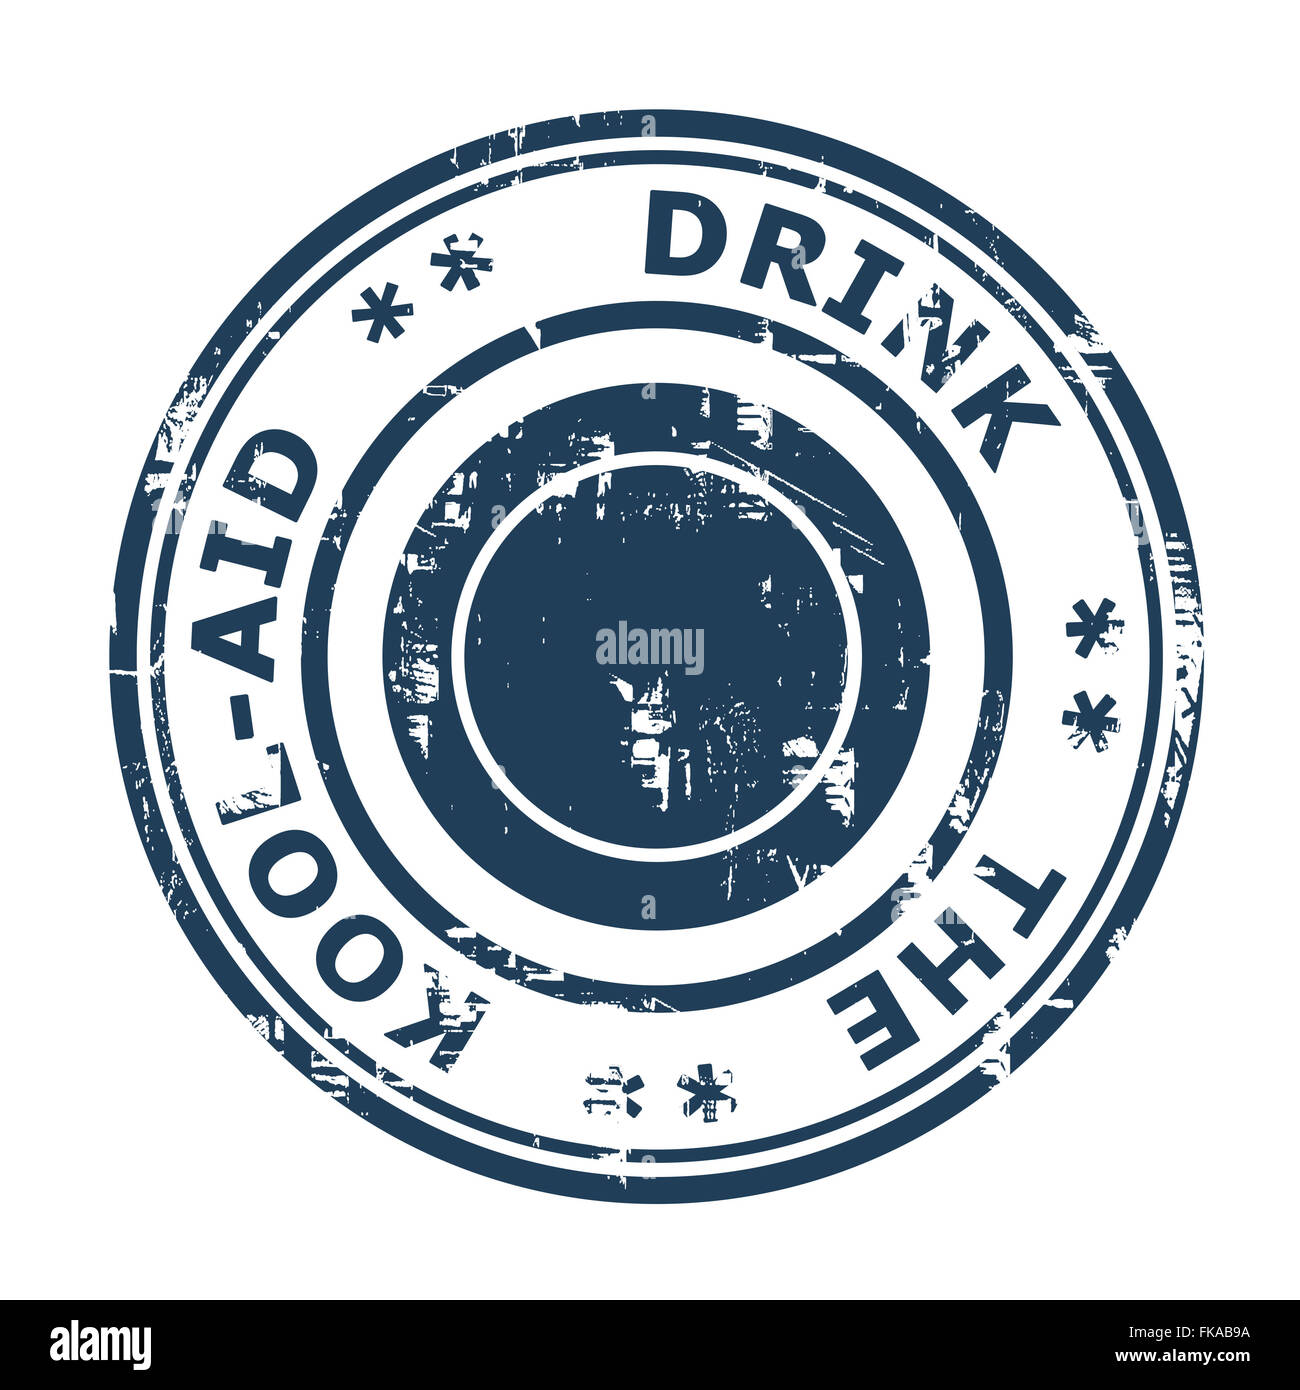 Drink the Cool-Aid business concept stamp isolated on a white background. Stock Photo